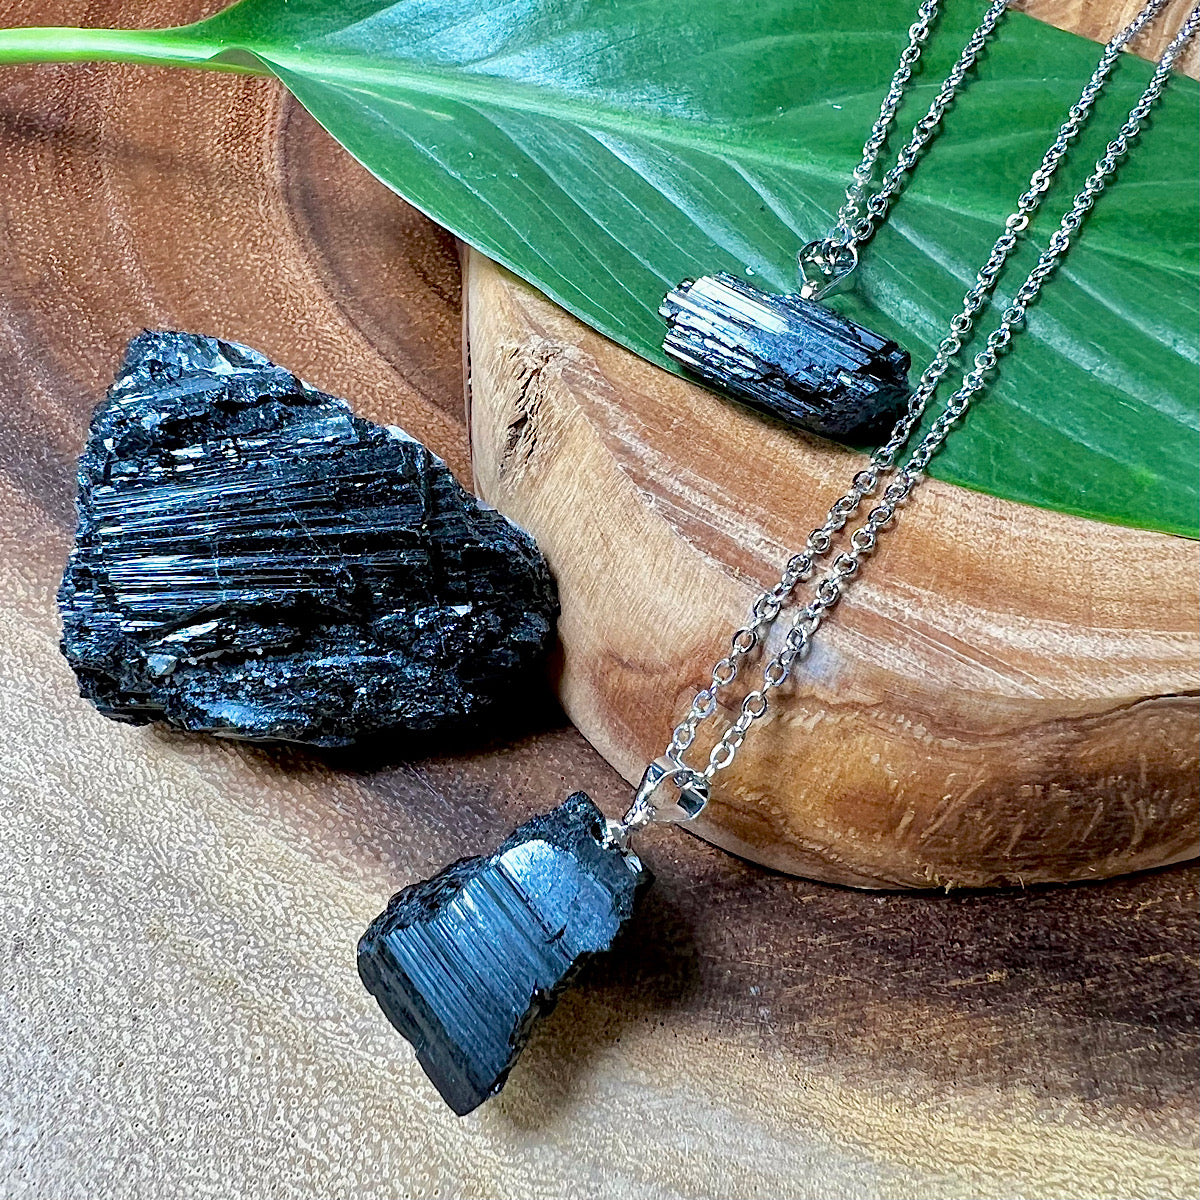 Amazon.com: Raw Black Tourmaline choker necklace, Sterling Silver,  Protection, grounding : Handmade Products